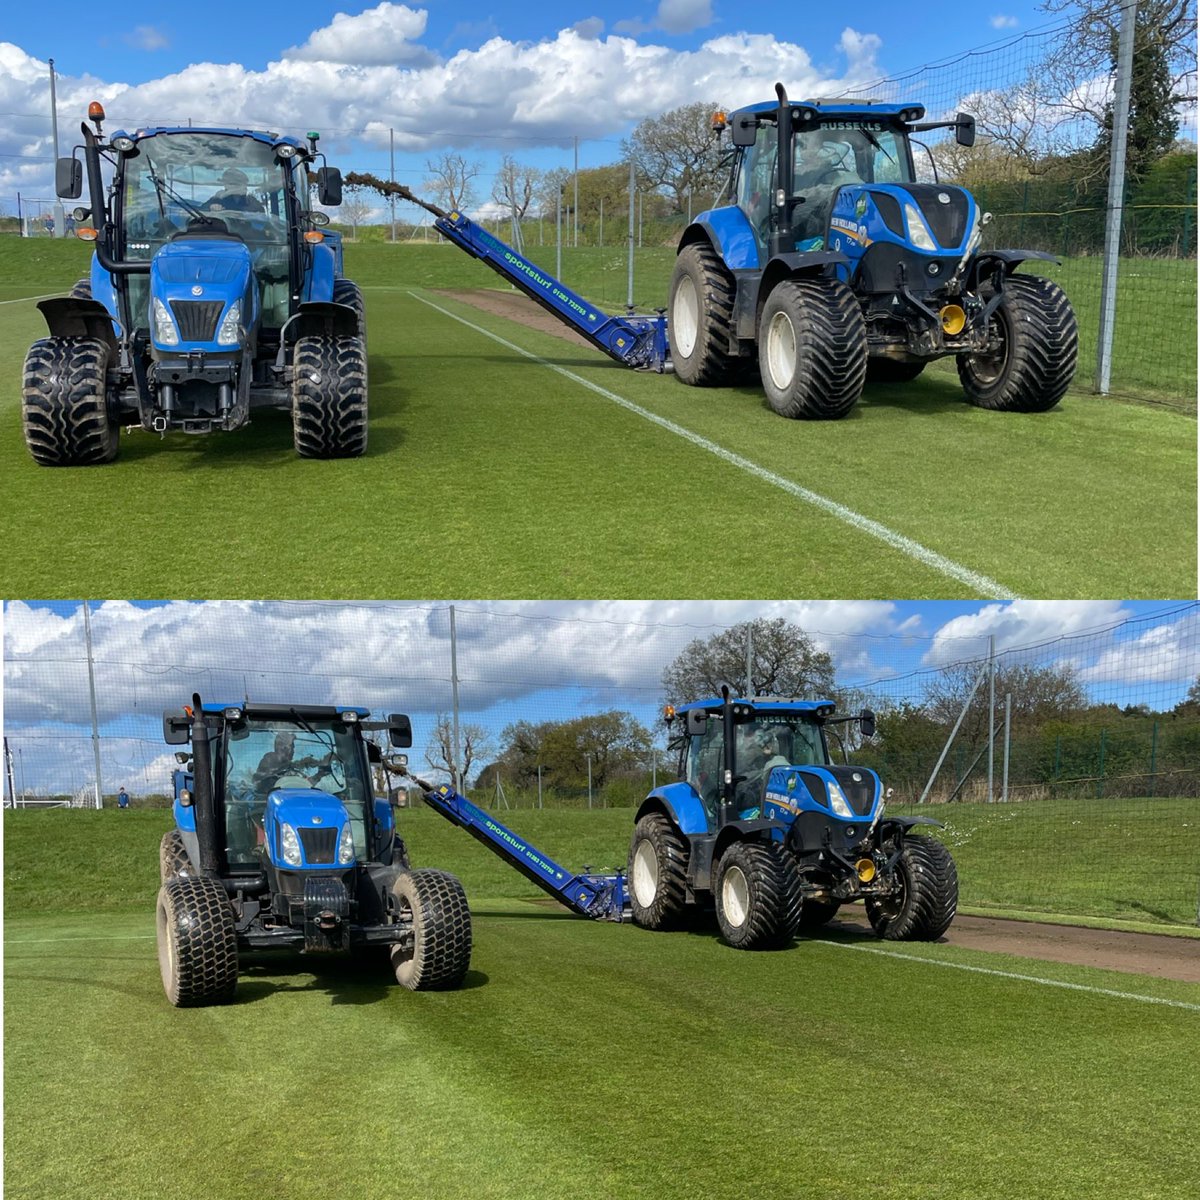 Blue skis , blue tractors and that time of year again, nothing better than some training ground stuff before the end of the season ⁦@dcfcofficial⁩ ⁦@Tommopj1985⁩ ⁦@Talbot_Ed⁩ ⁦@TurfBusiness⁩ ⁦@CampeyTurfCare⁩ ⁦@dcfcacademy⁩ ⚽️